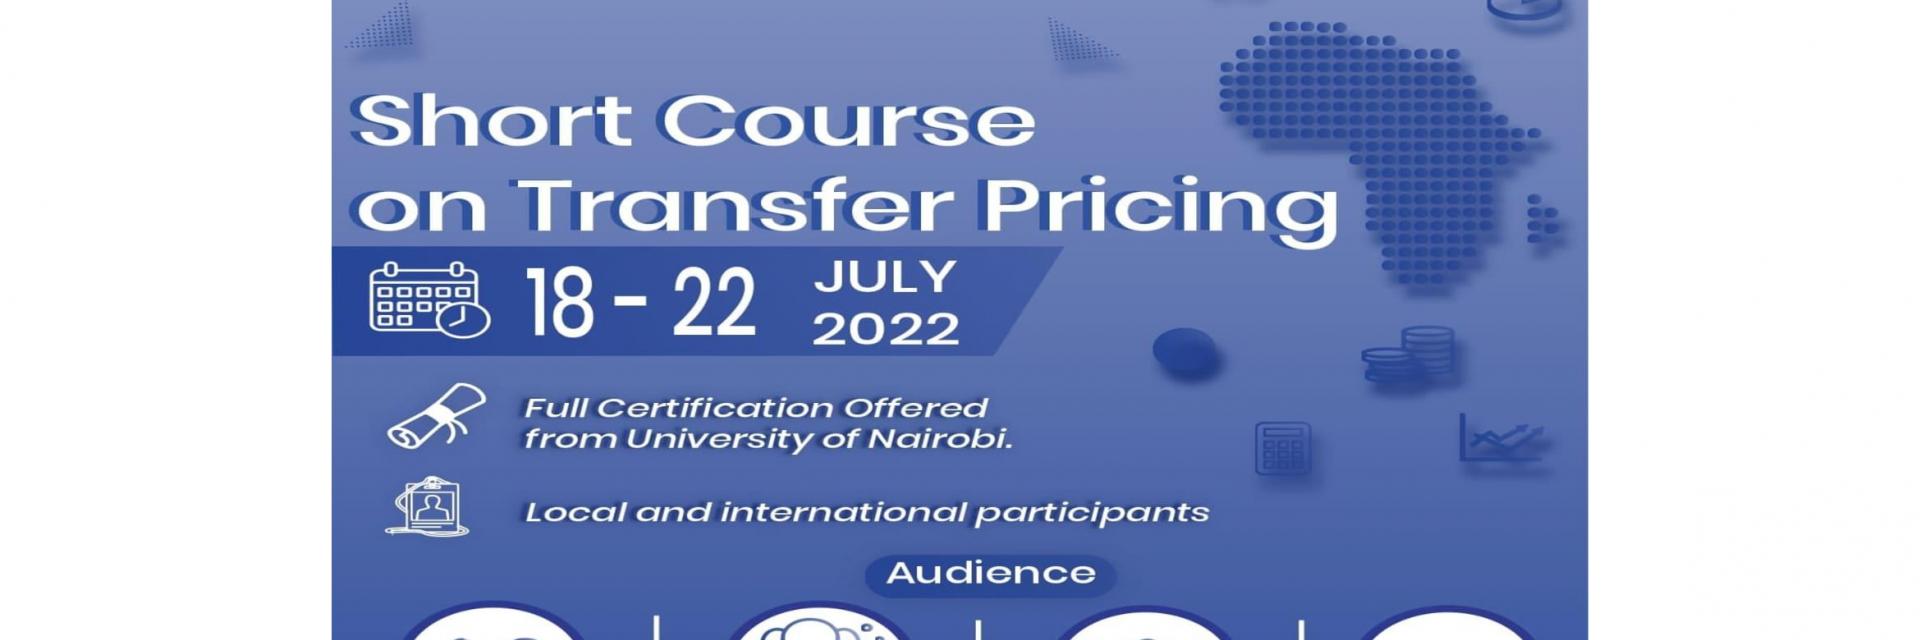 Short Course: Transfer Pricing